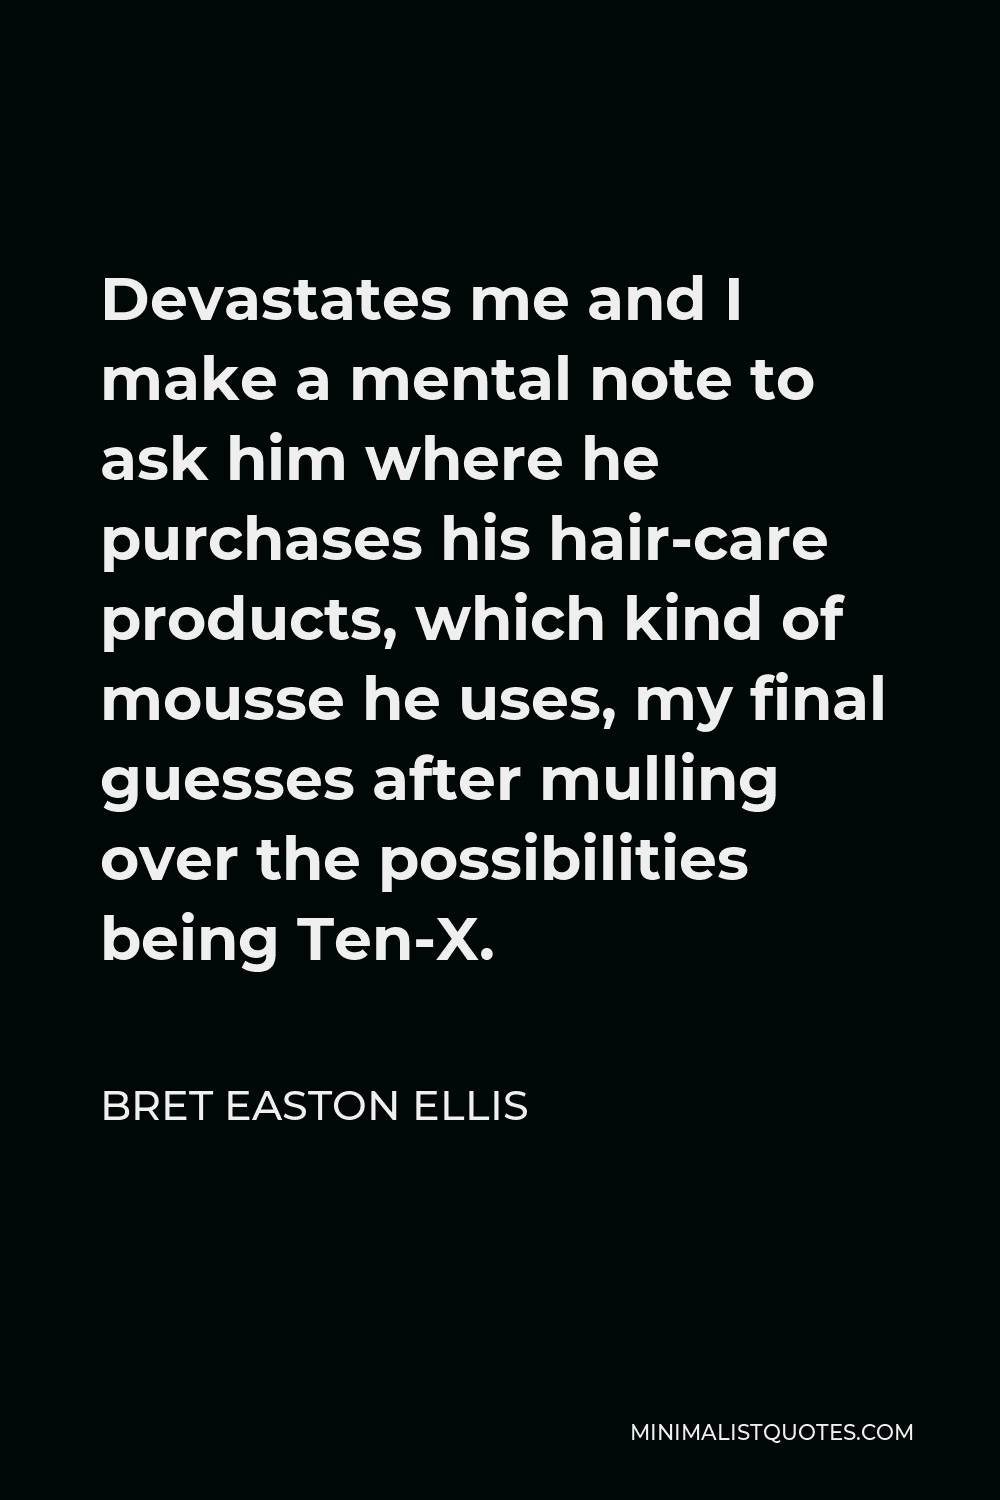 Bret Easton Ellis Quote - Devastates me and I make a mental note to ask him where he purchases his hair-care products, which kind of mousse he uses, my final guesses after mulling over the possibilities being Ten-X.